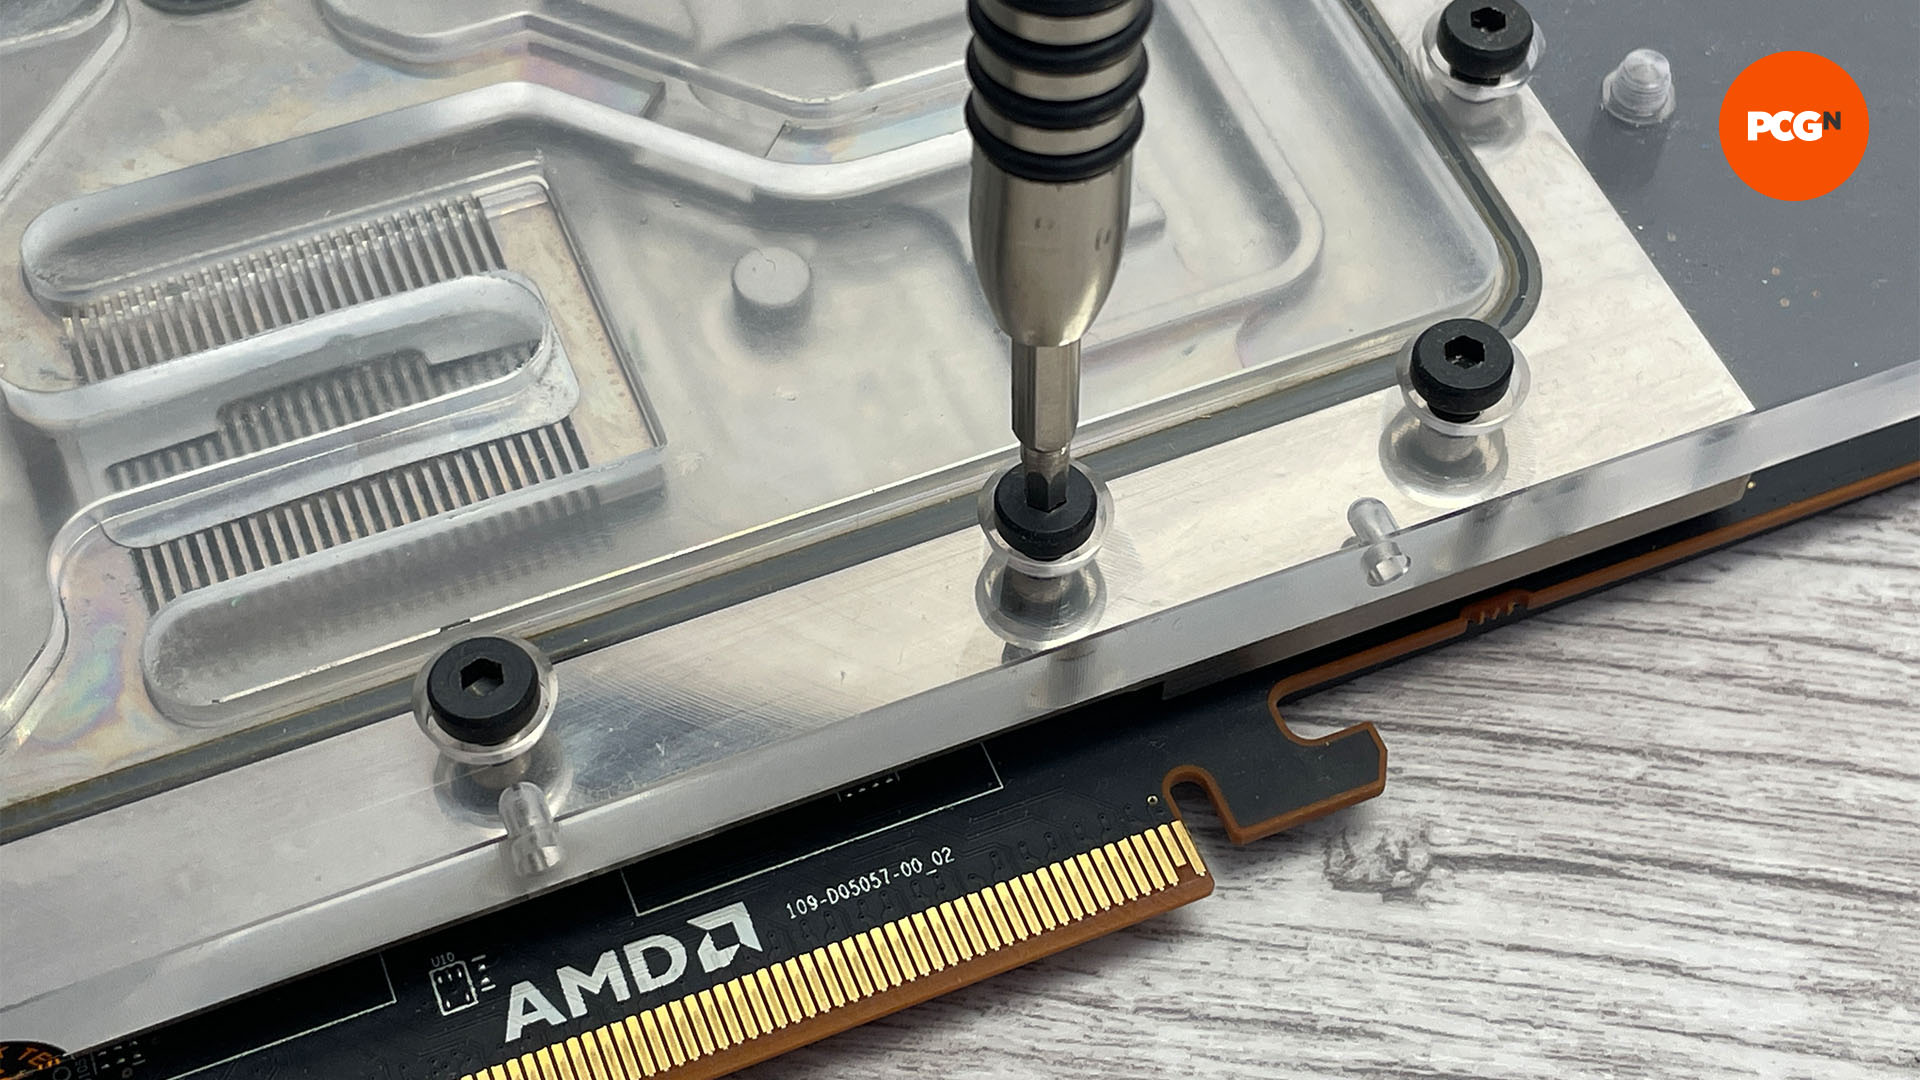 How to clean a waterblock: Remove screws